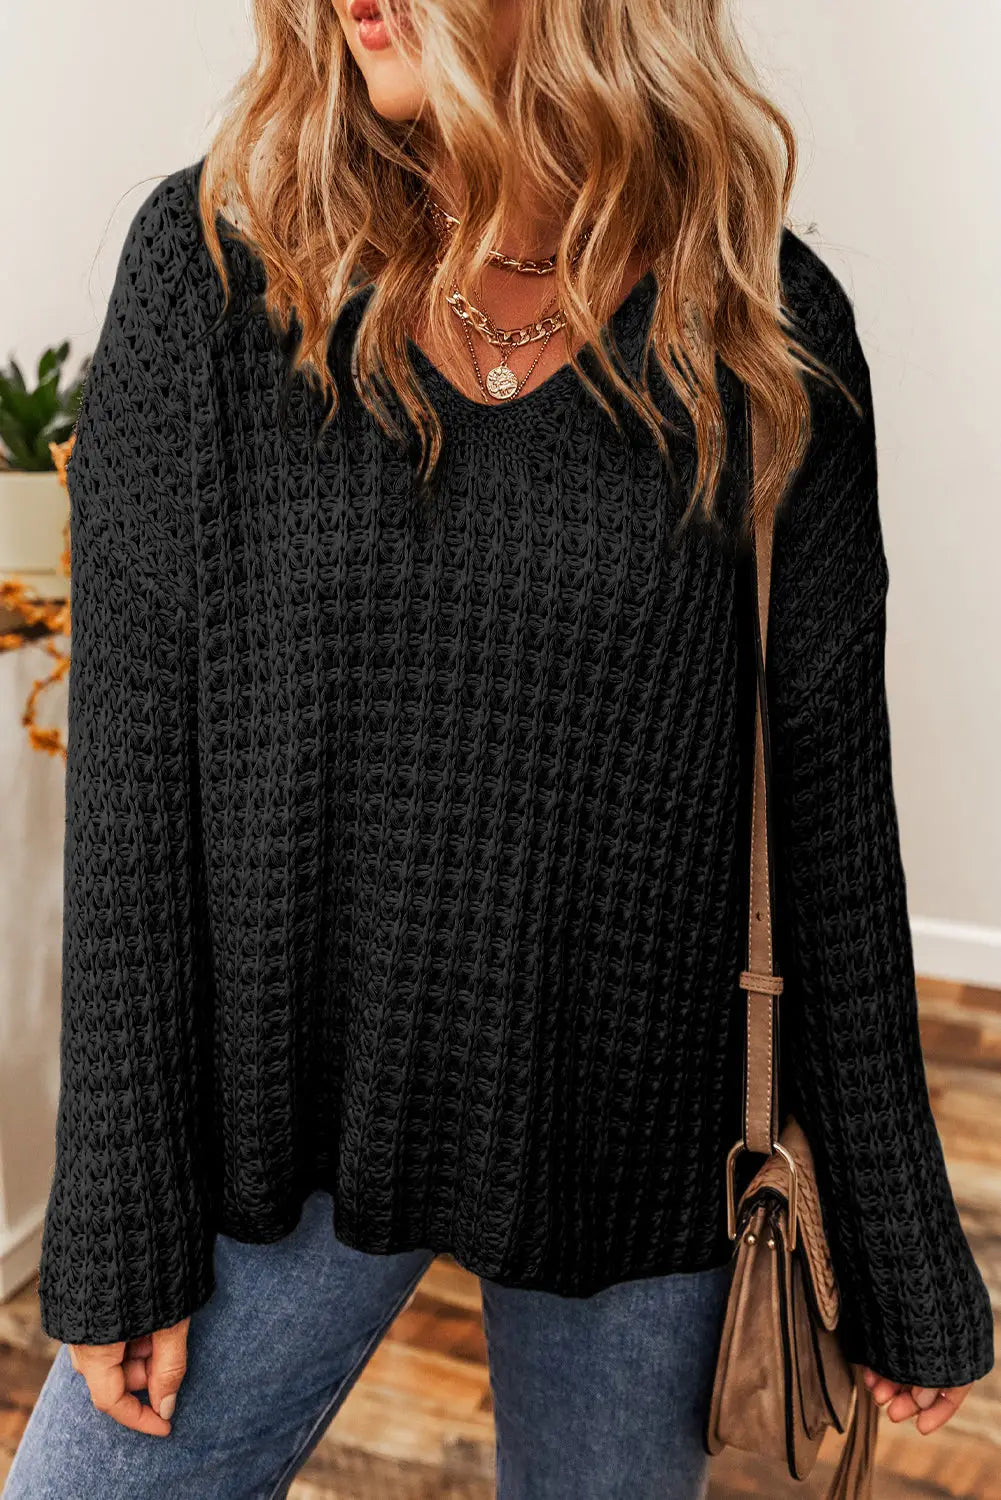 Black hollow-out crochet v neck sweater - s / 100%acrylic -